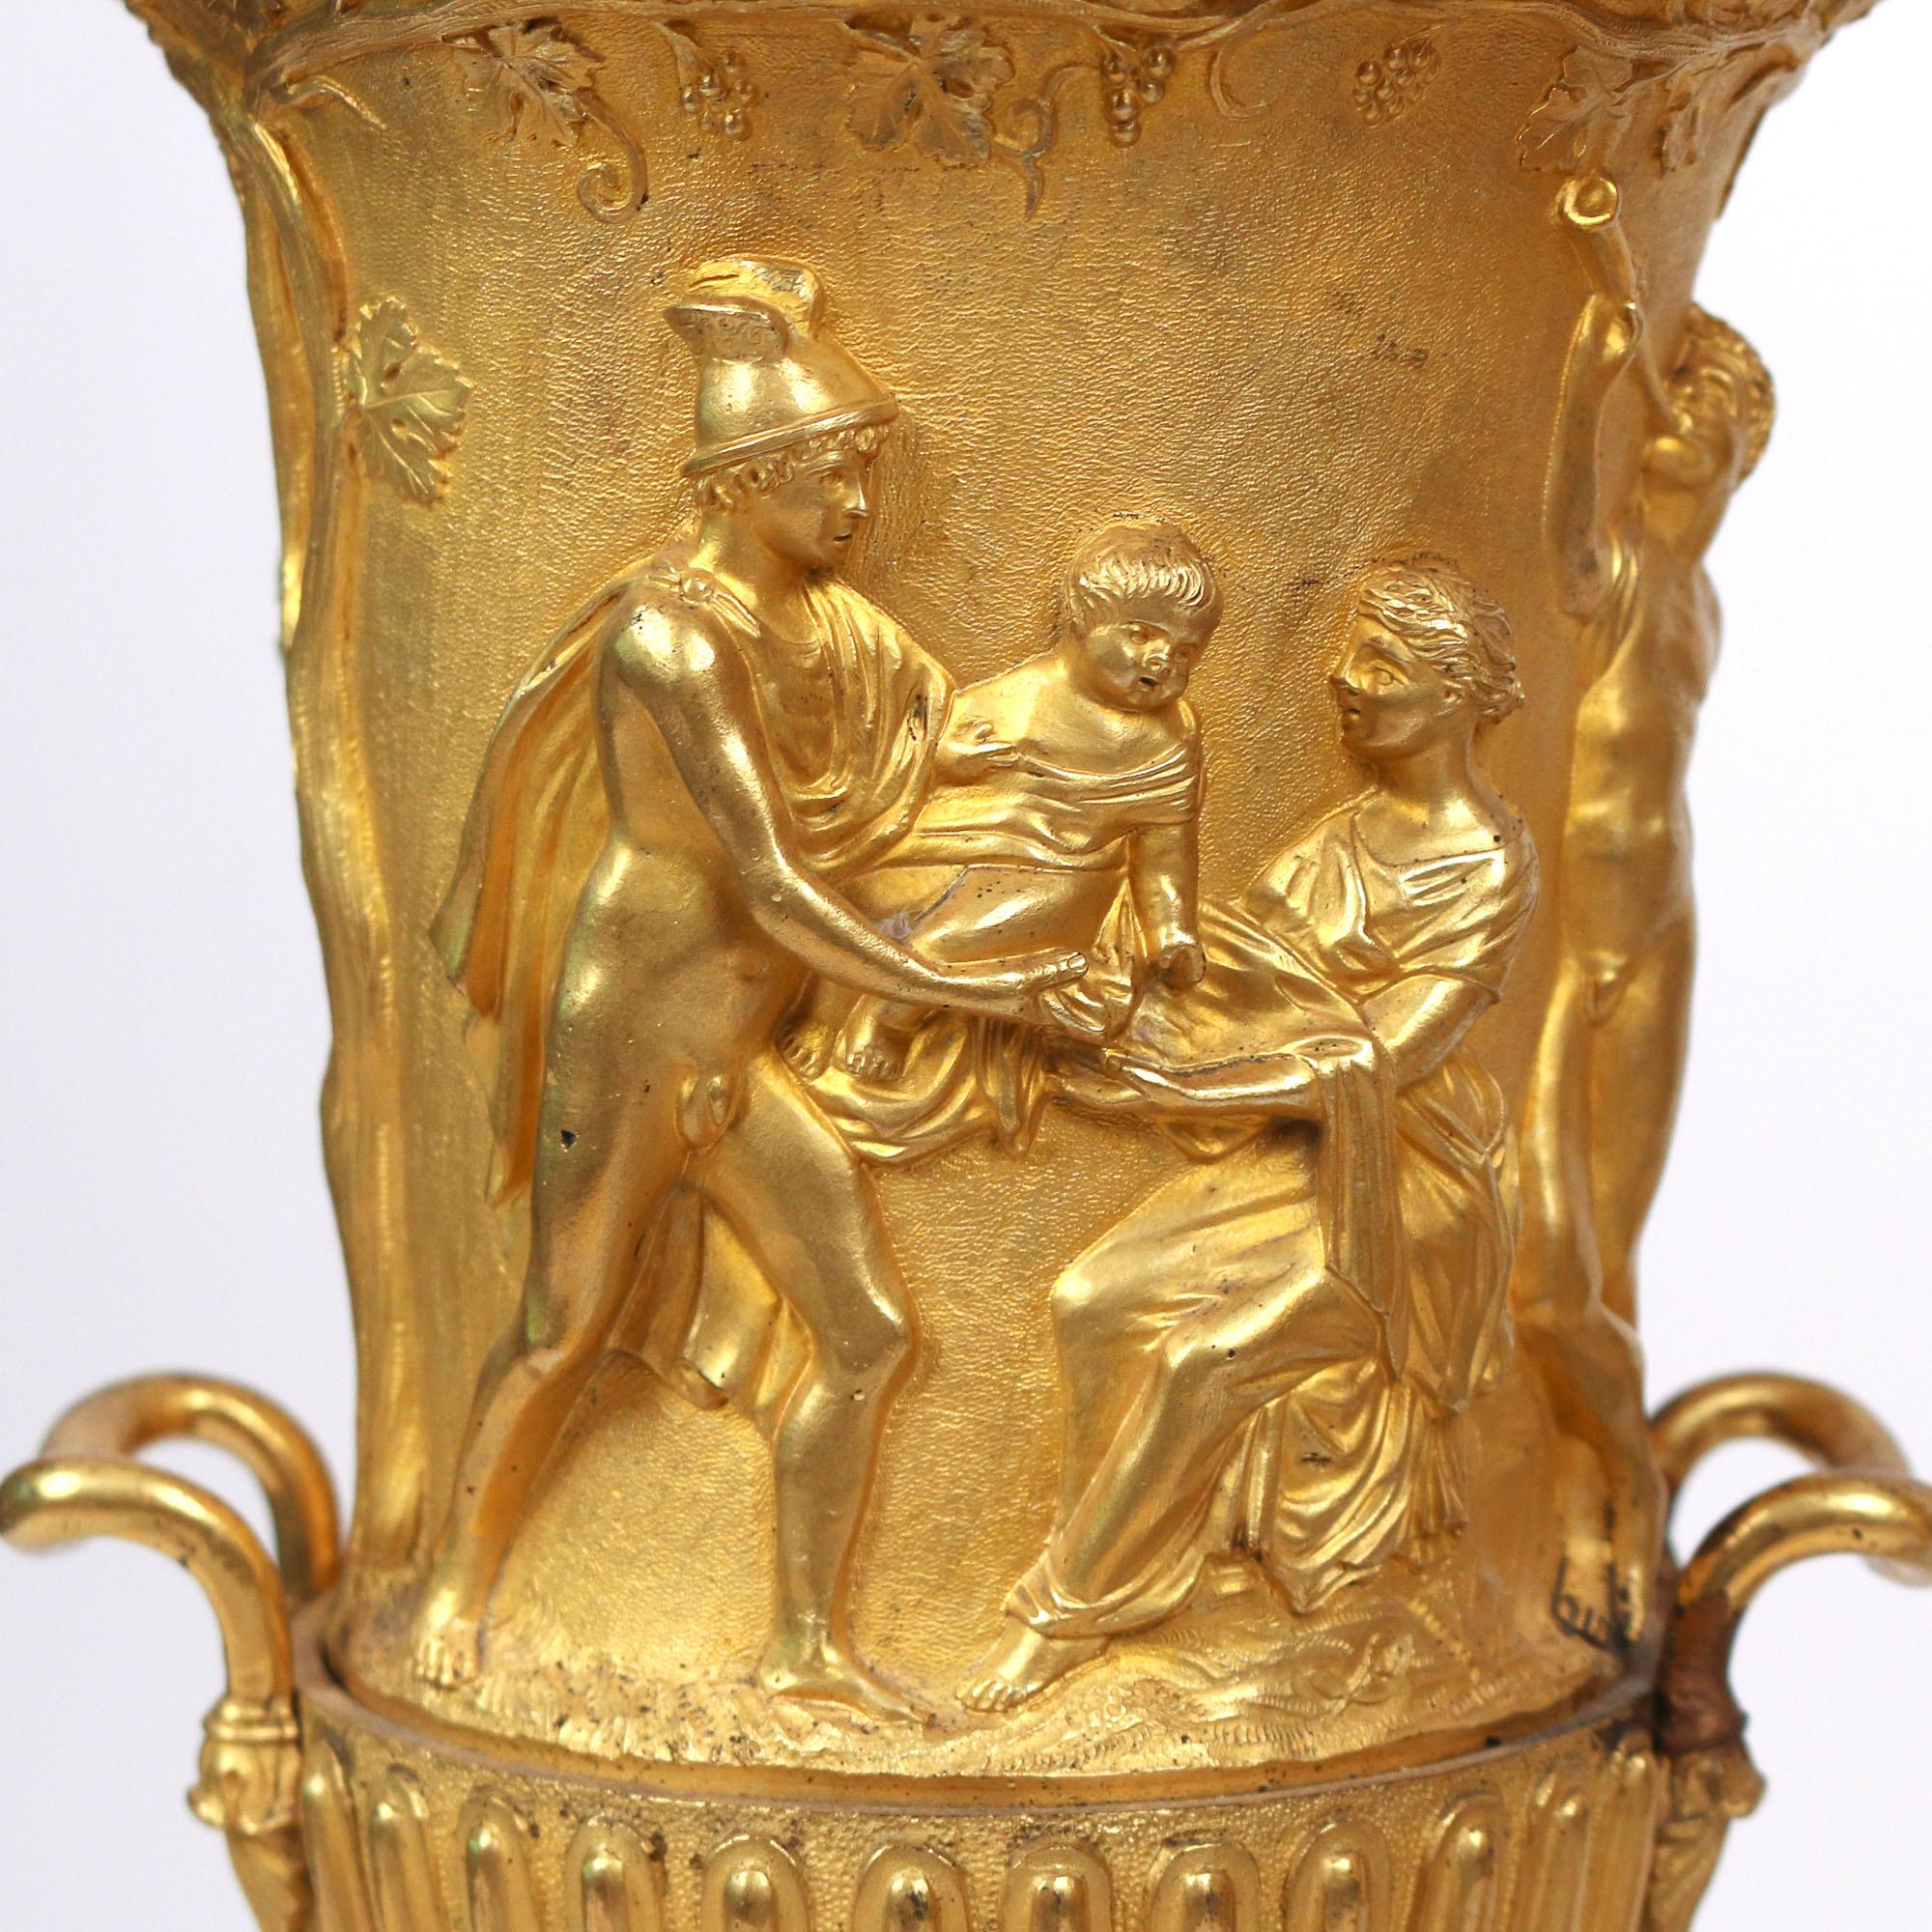 A Fine quality pair of gilt bronze neoclassical urns. 
The campagna form showing figures engaged in various activities and mounted on black onyx plinths.

Origin: French. Date: 19th century. Size: 17 1/4 in. x 6 1/2 in.